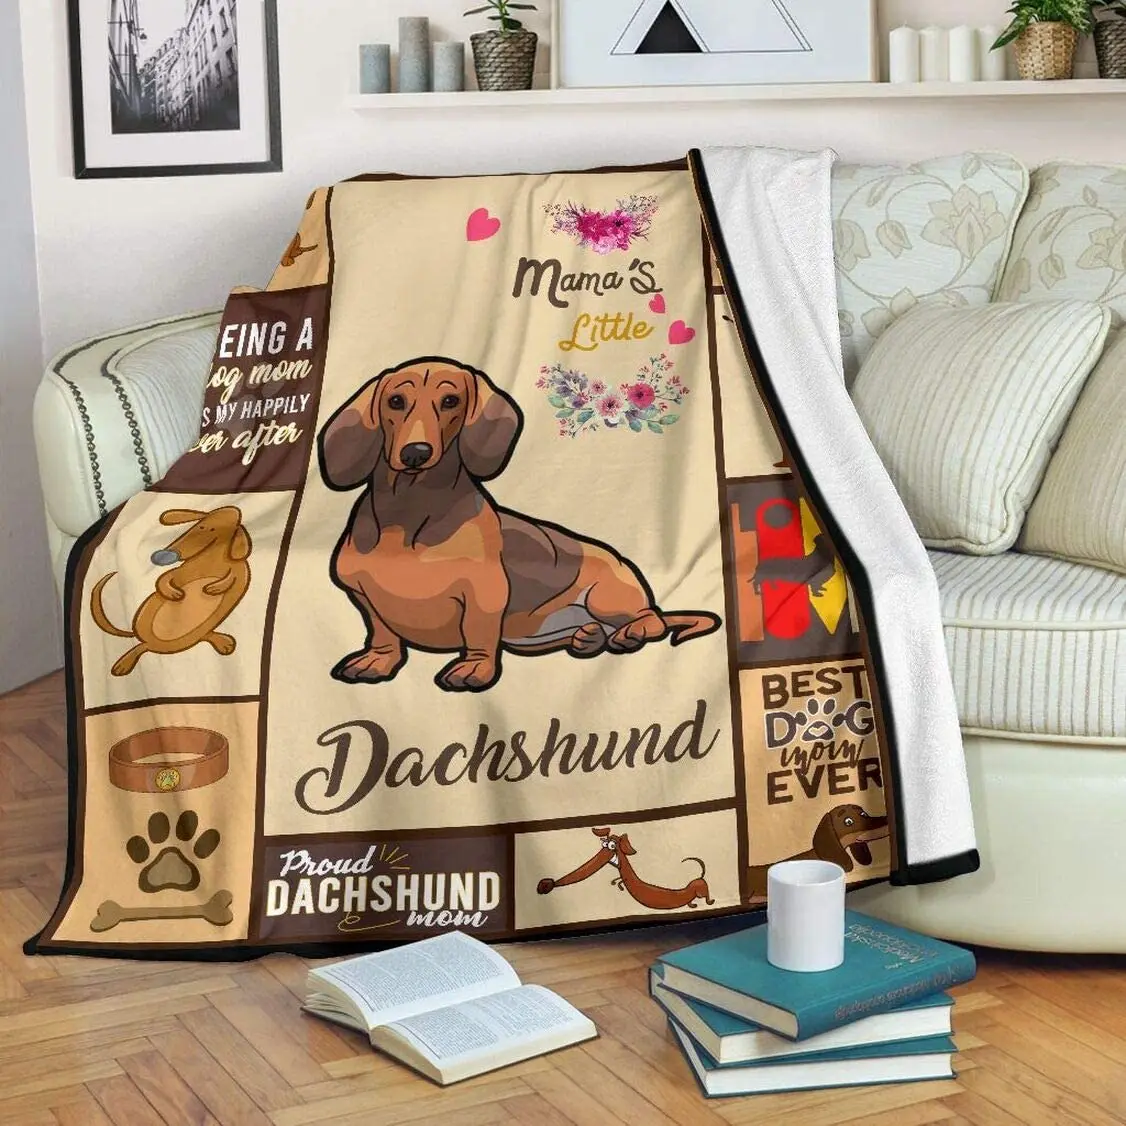 

When I Needed A Hand I Found Your Paws Dachshund Theme Flannel Throw Blanket Sofa Bed Soft Lightweight Kids Gift Comfy Seasons